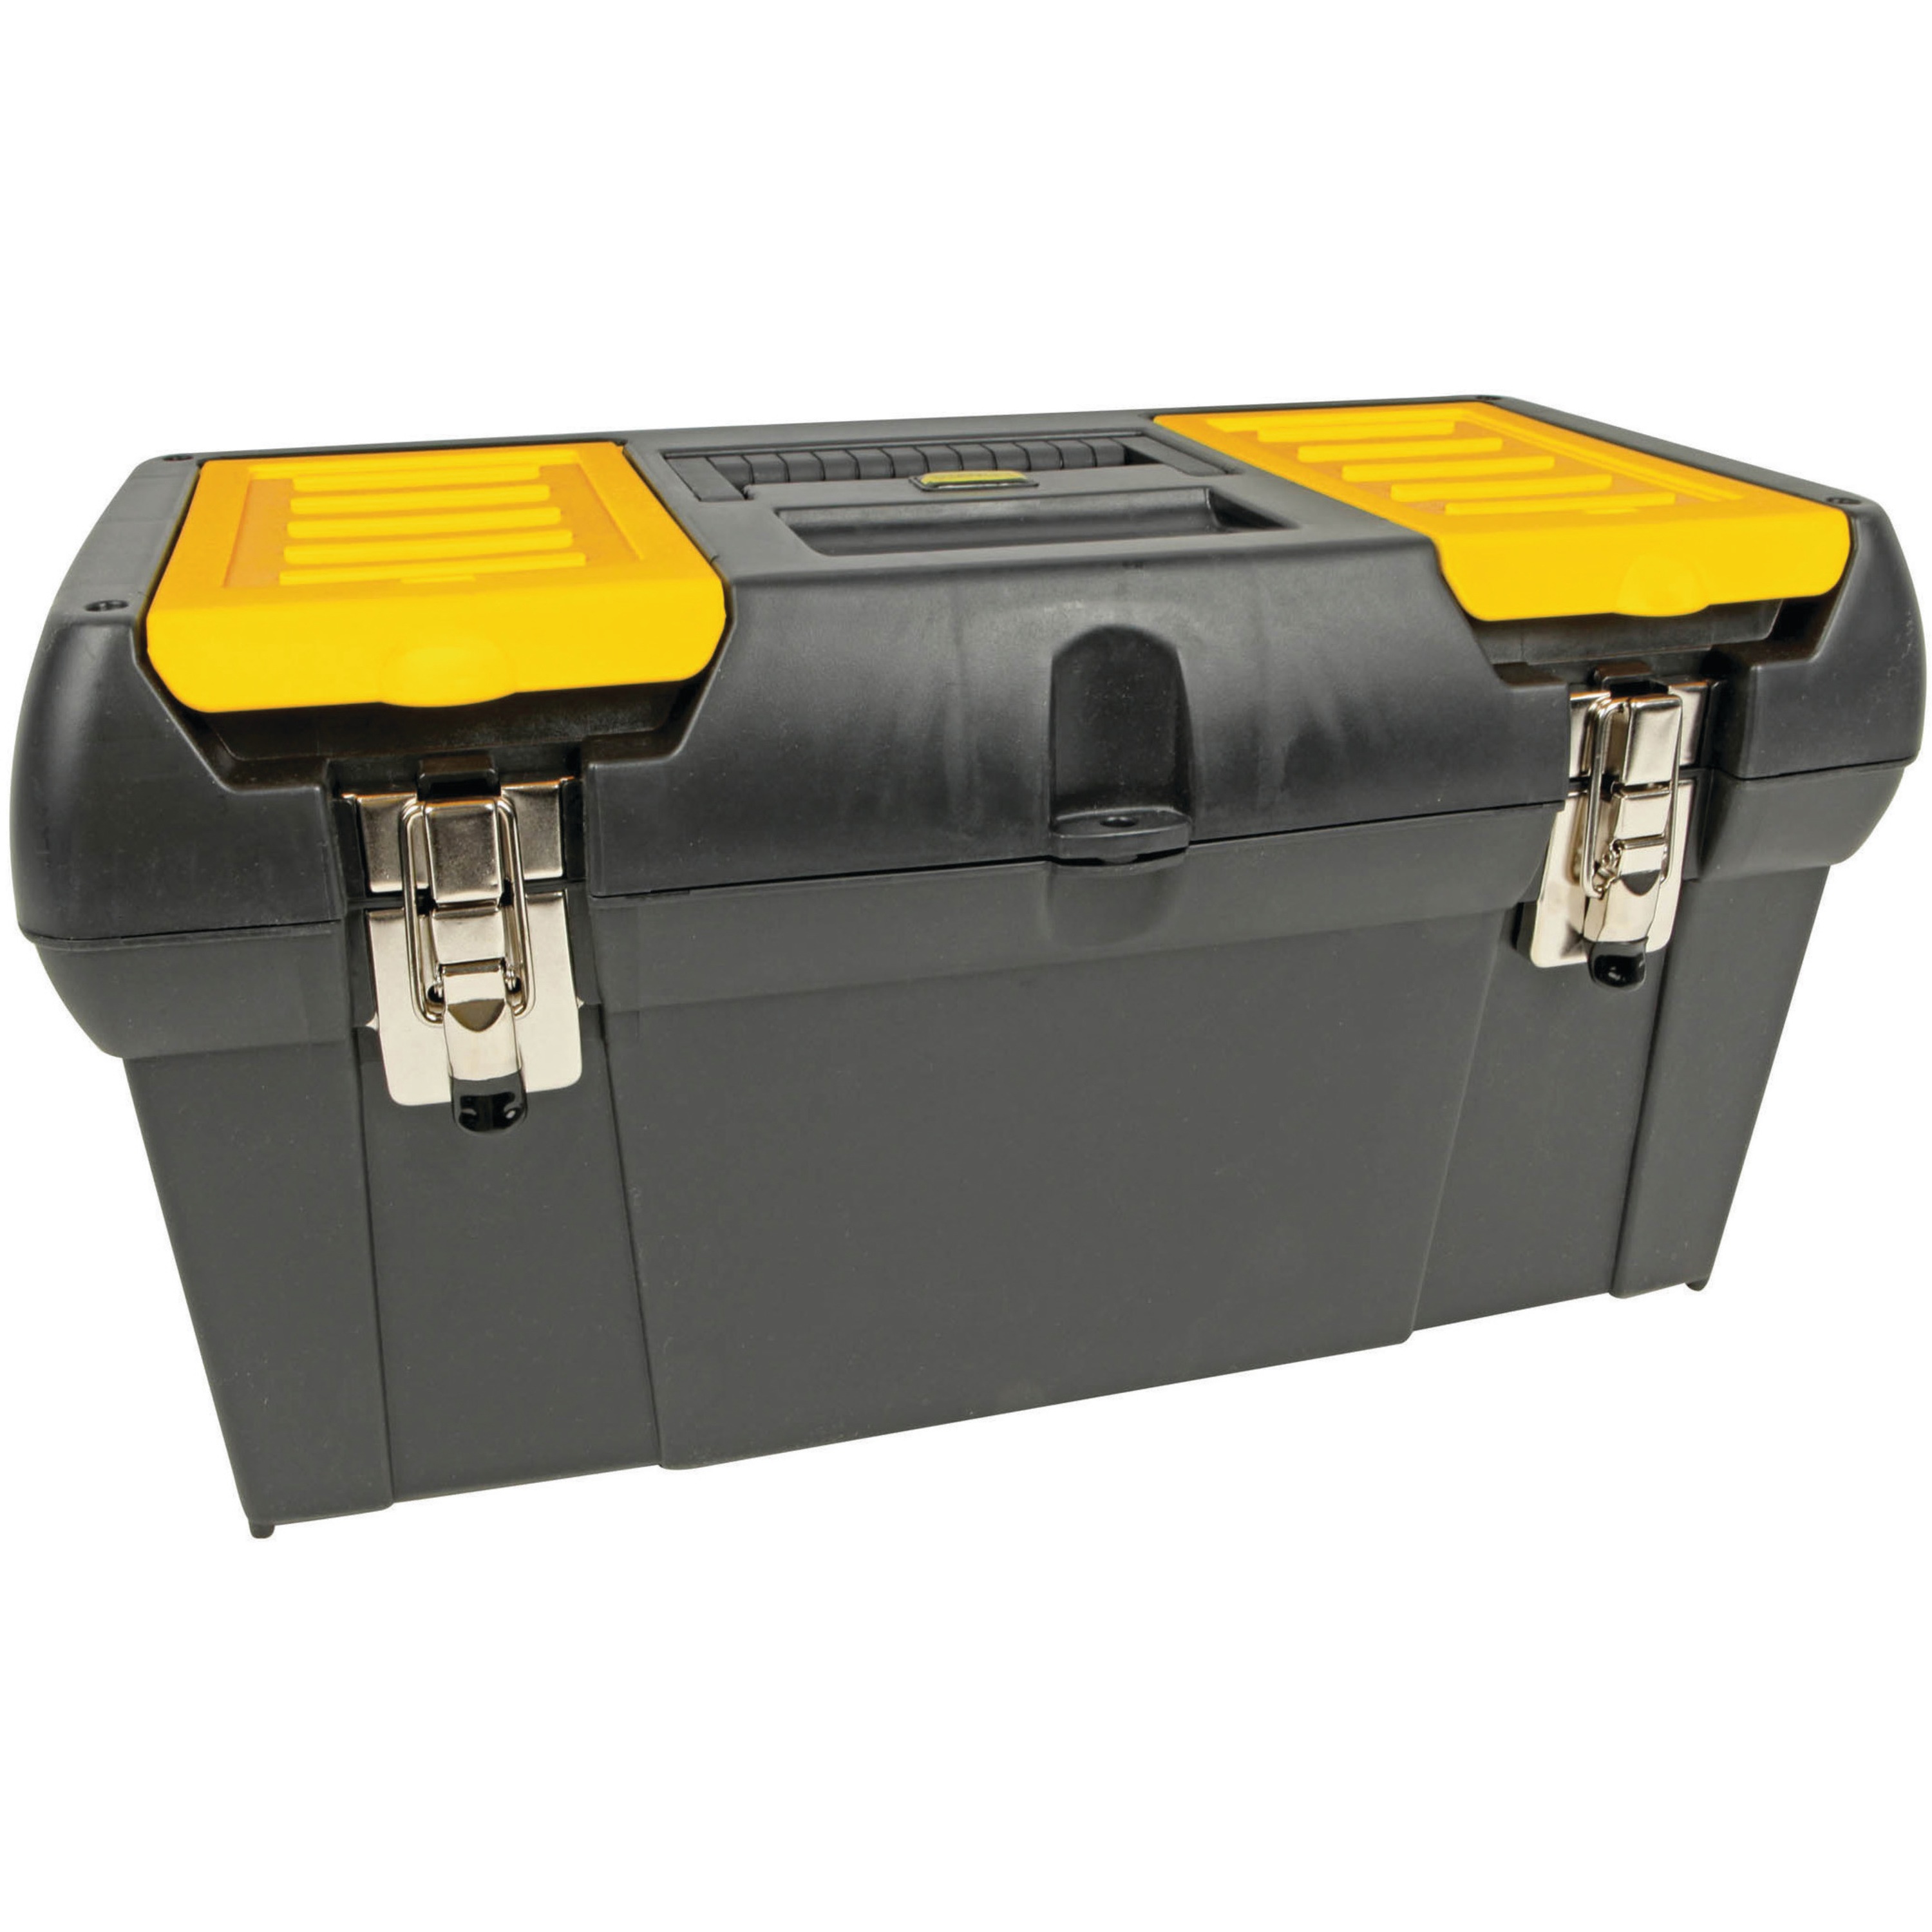 Stanley Tools - 18 14 in Series 2000 Toolbox with Tray - 019151M